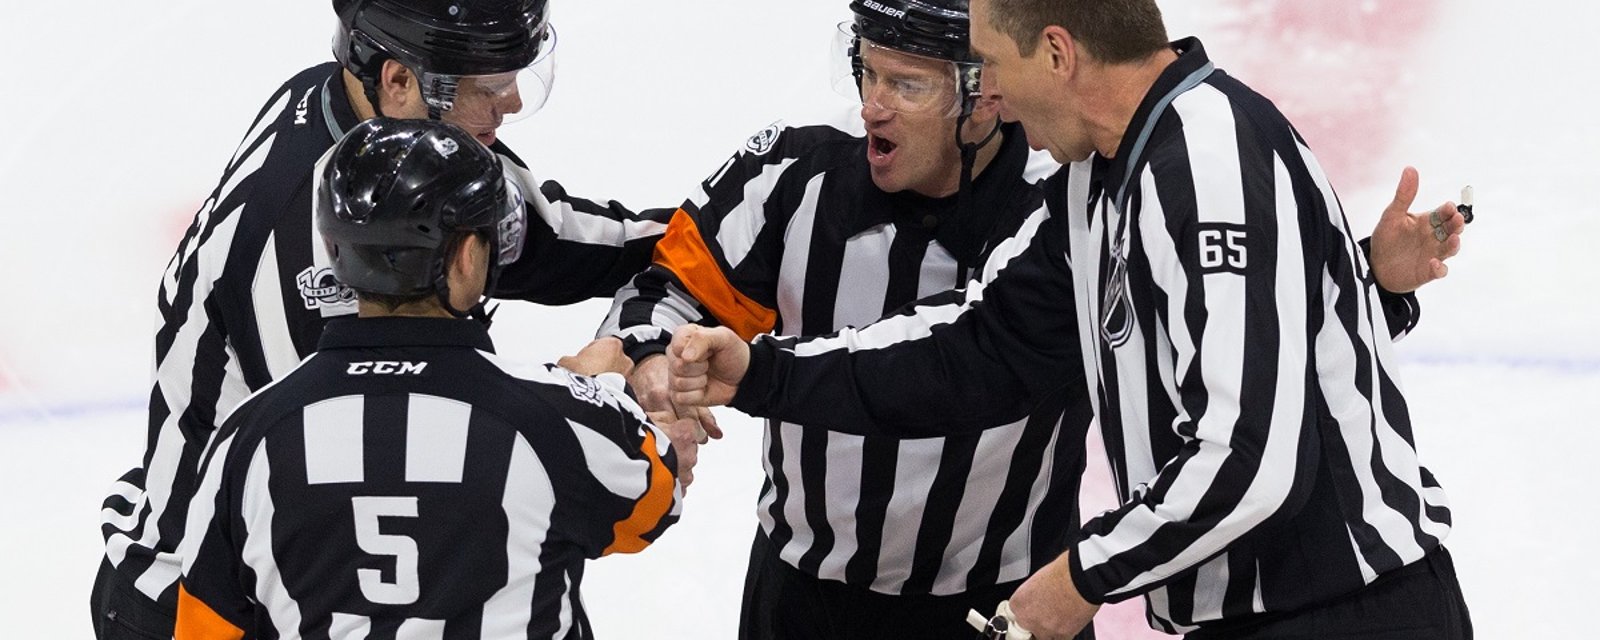 Breaking: More controversy in Game 7 after officials miss a very obvious call.